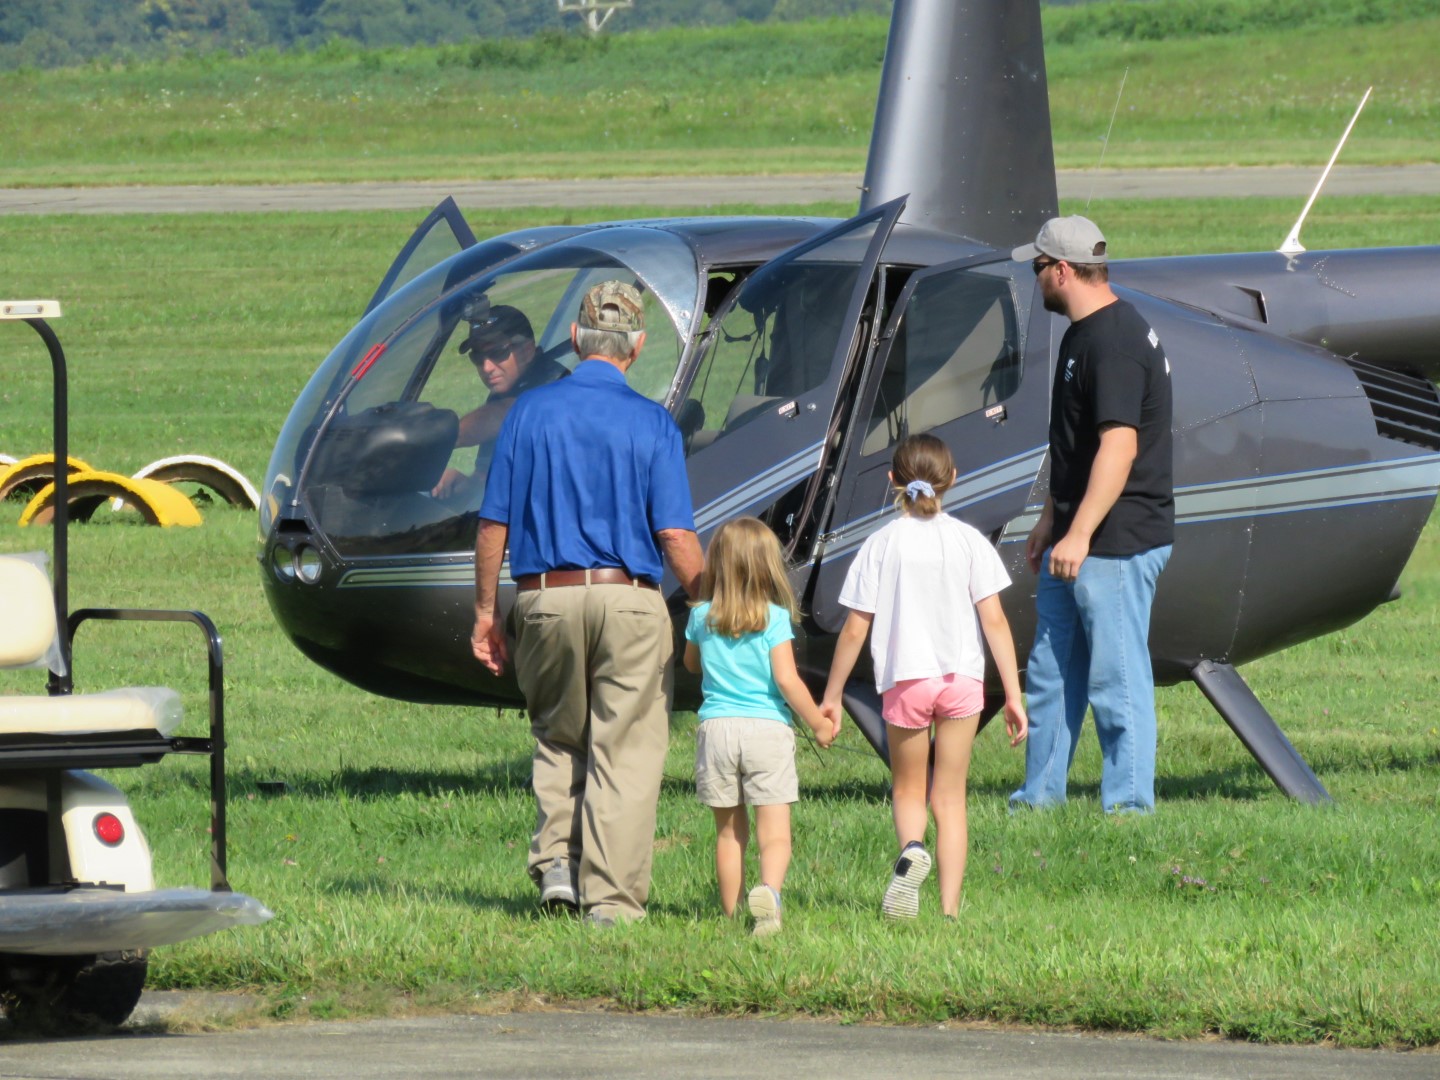 Helicopter Rides at Aviation Days